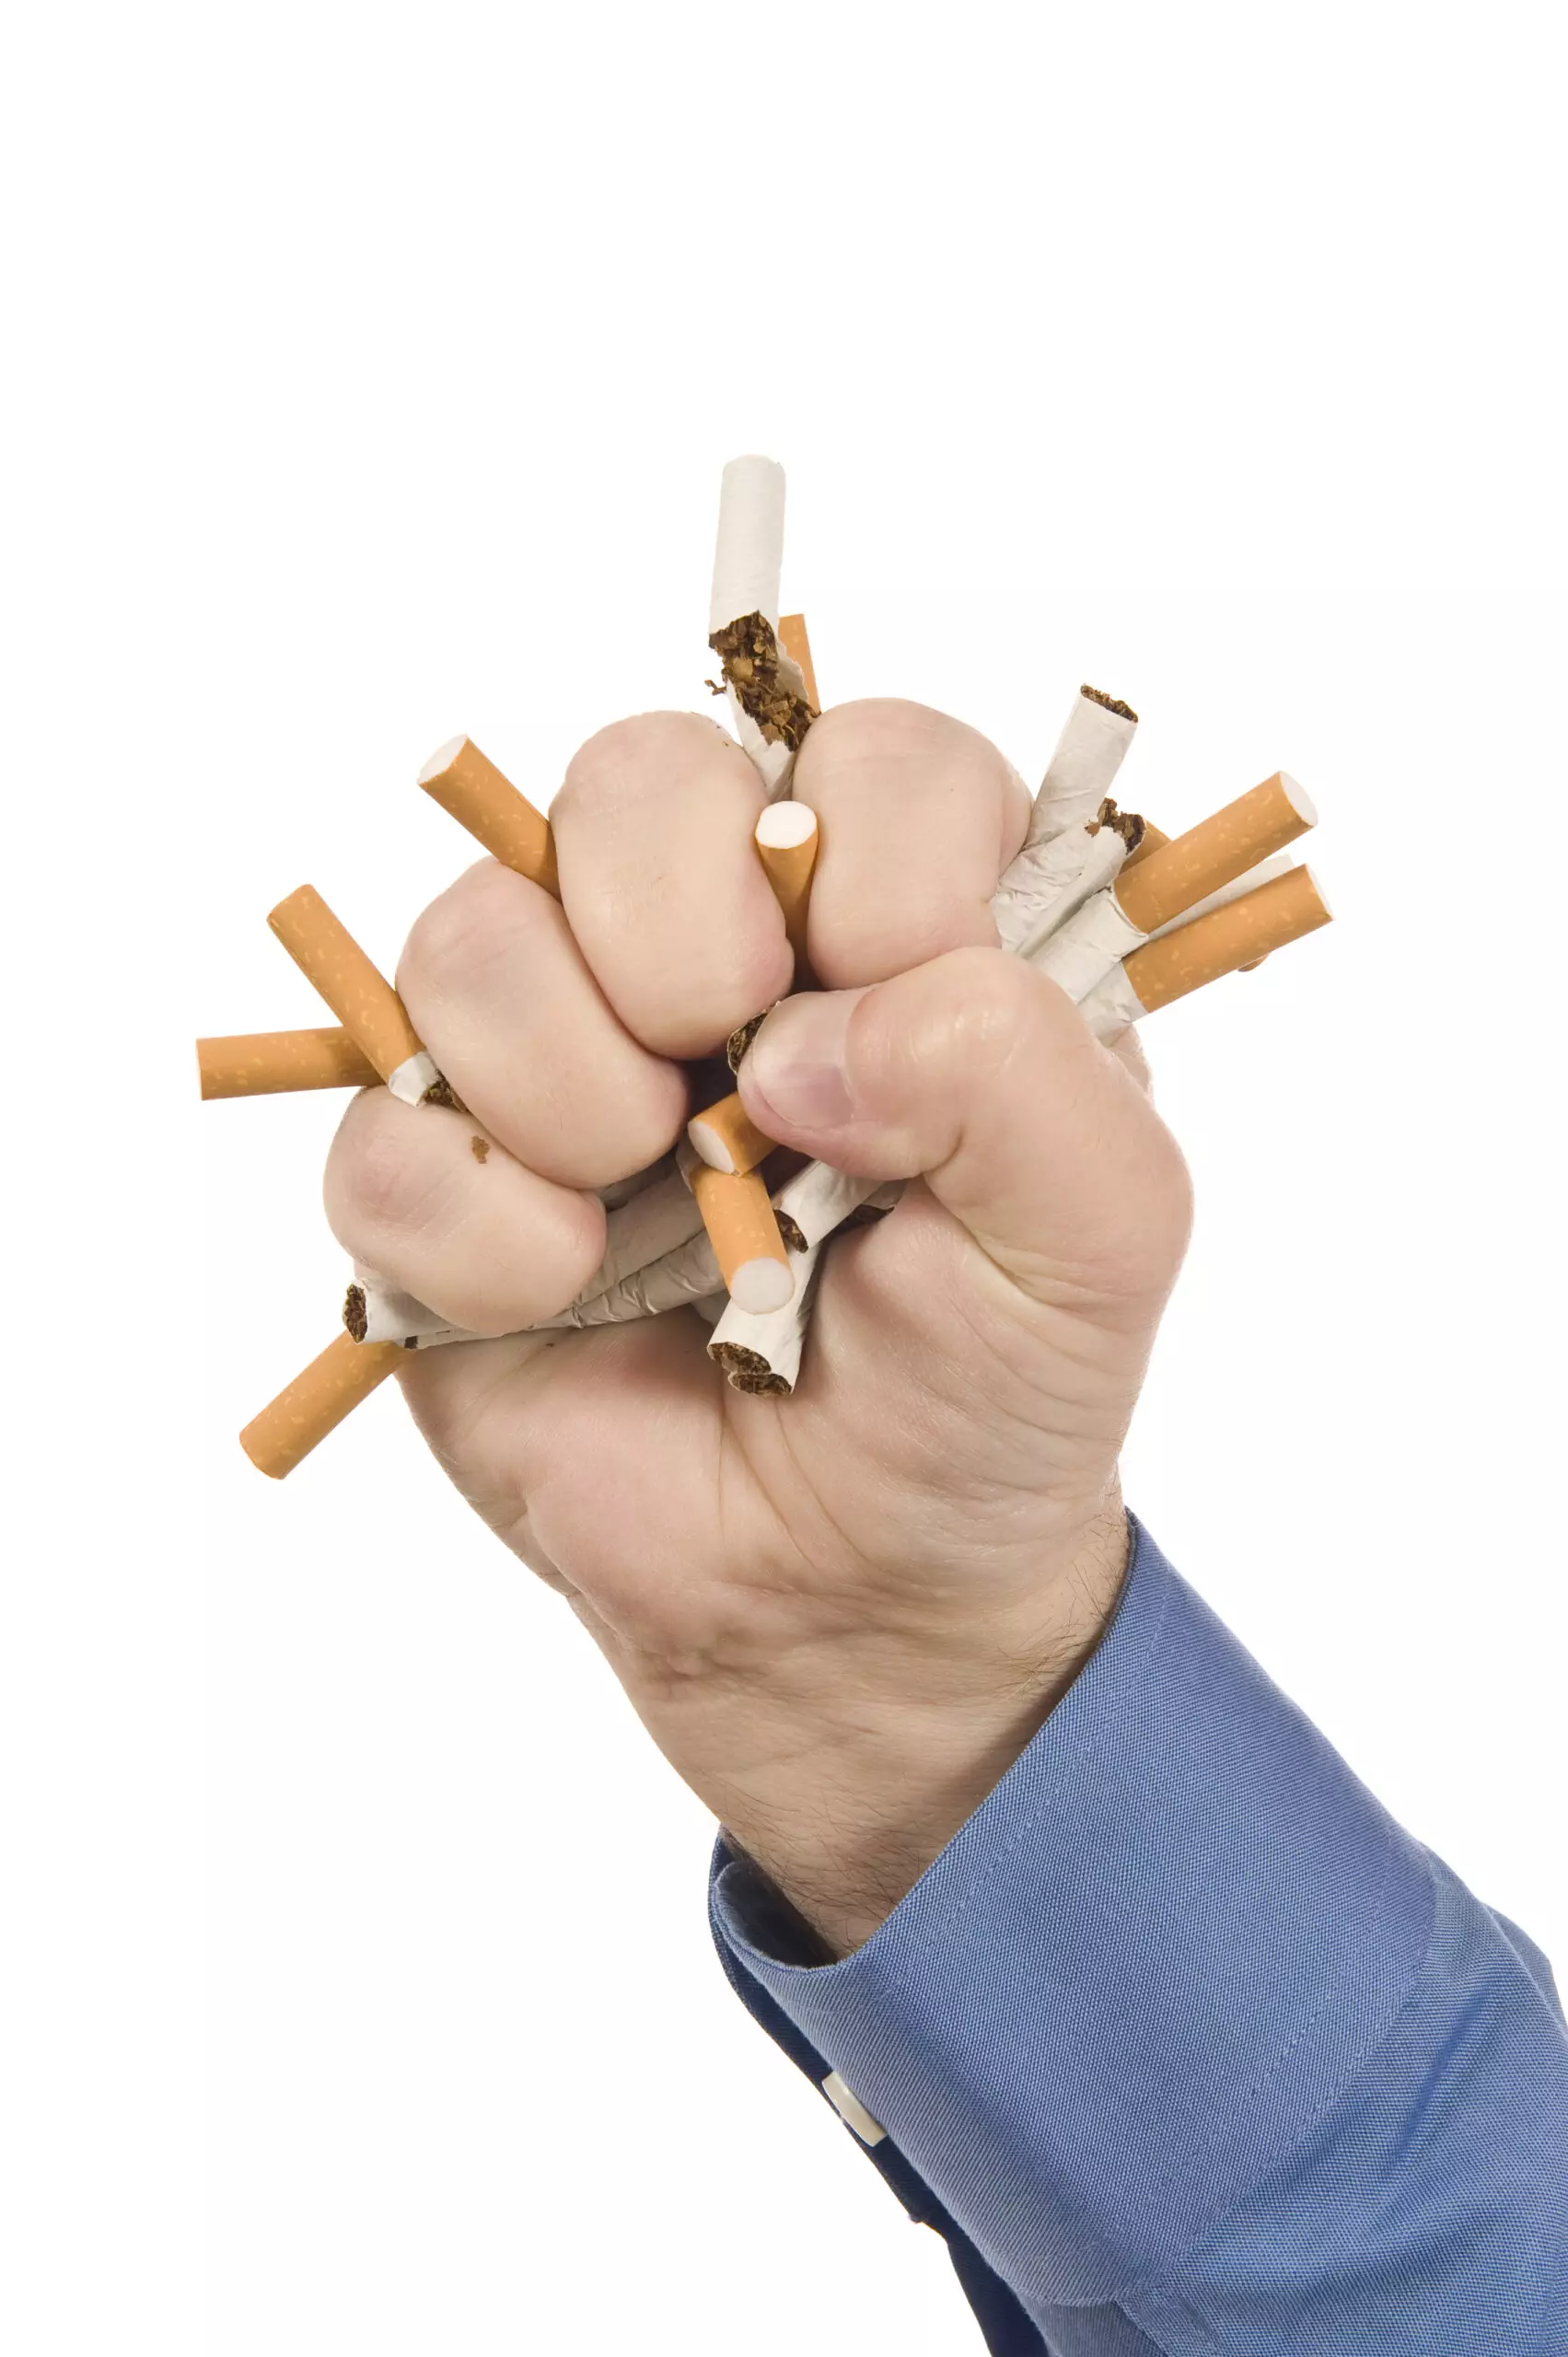 Hand crushing cigarettes, concept of quitting smoking.